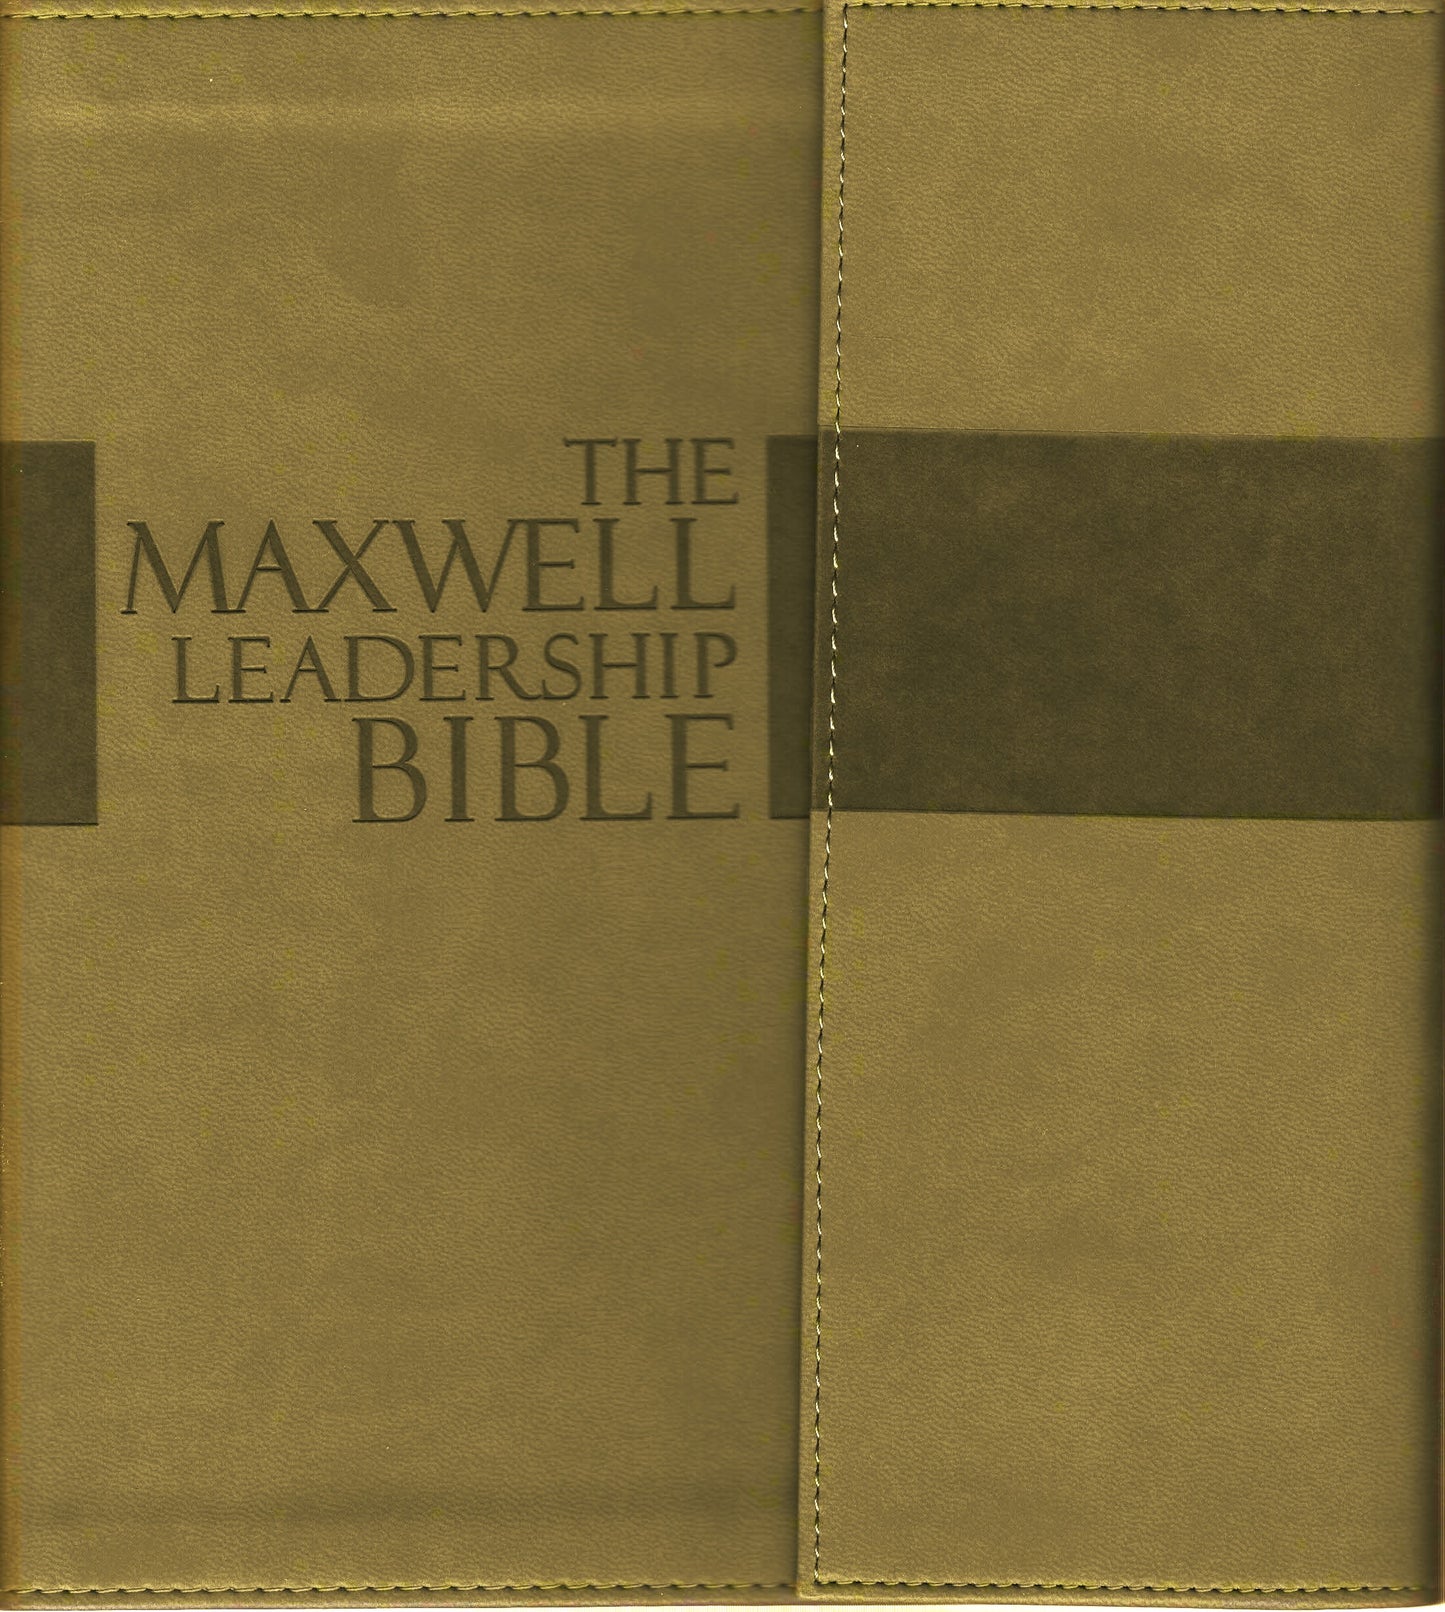 Thomas Nelson NKJV® The Maxwell Leadership Bible - TakeNote Edition - Leathersoft™ (Dove Gray)